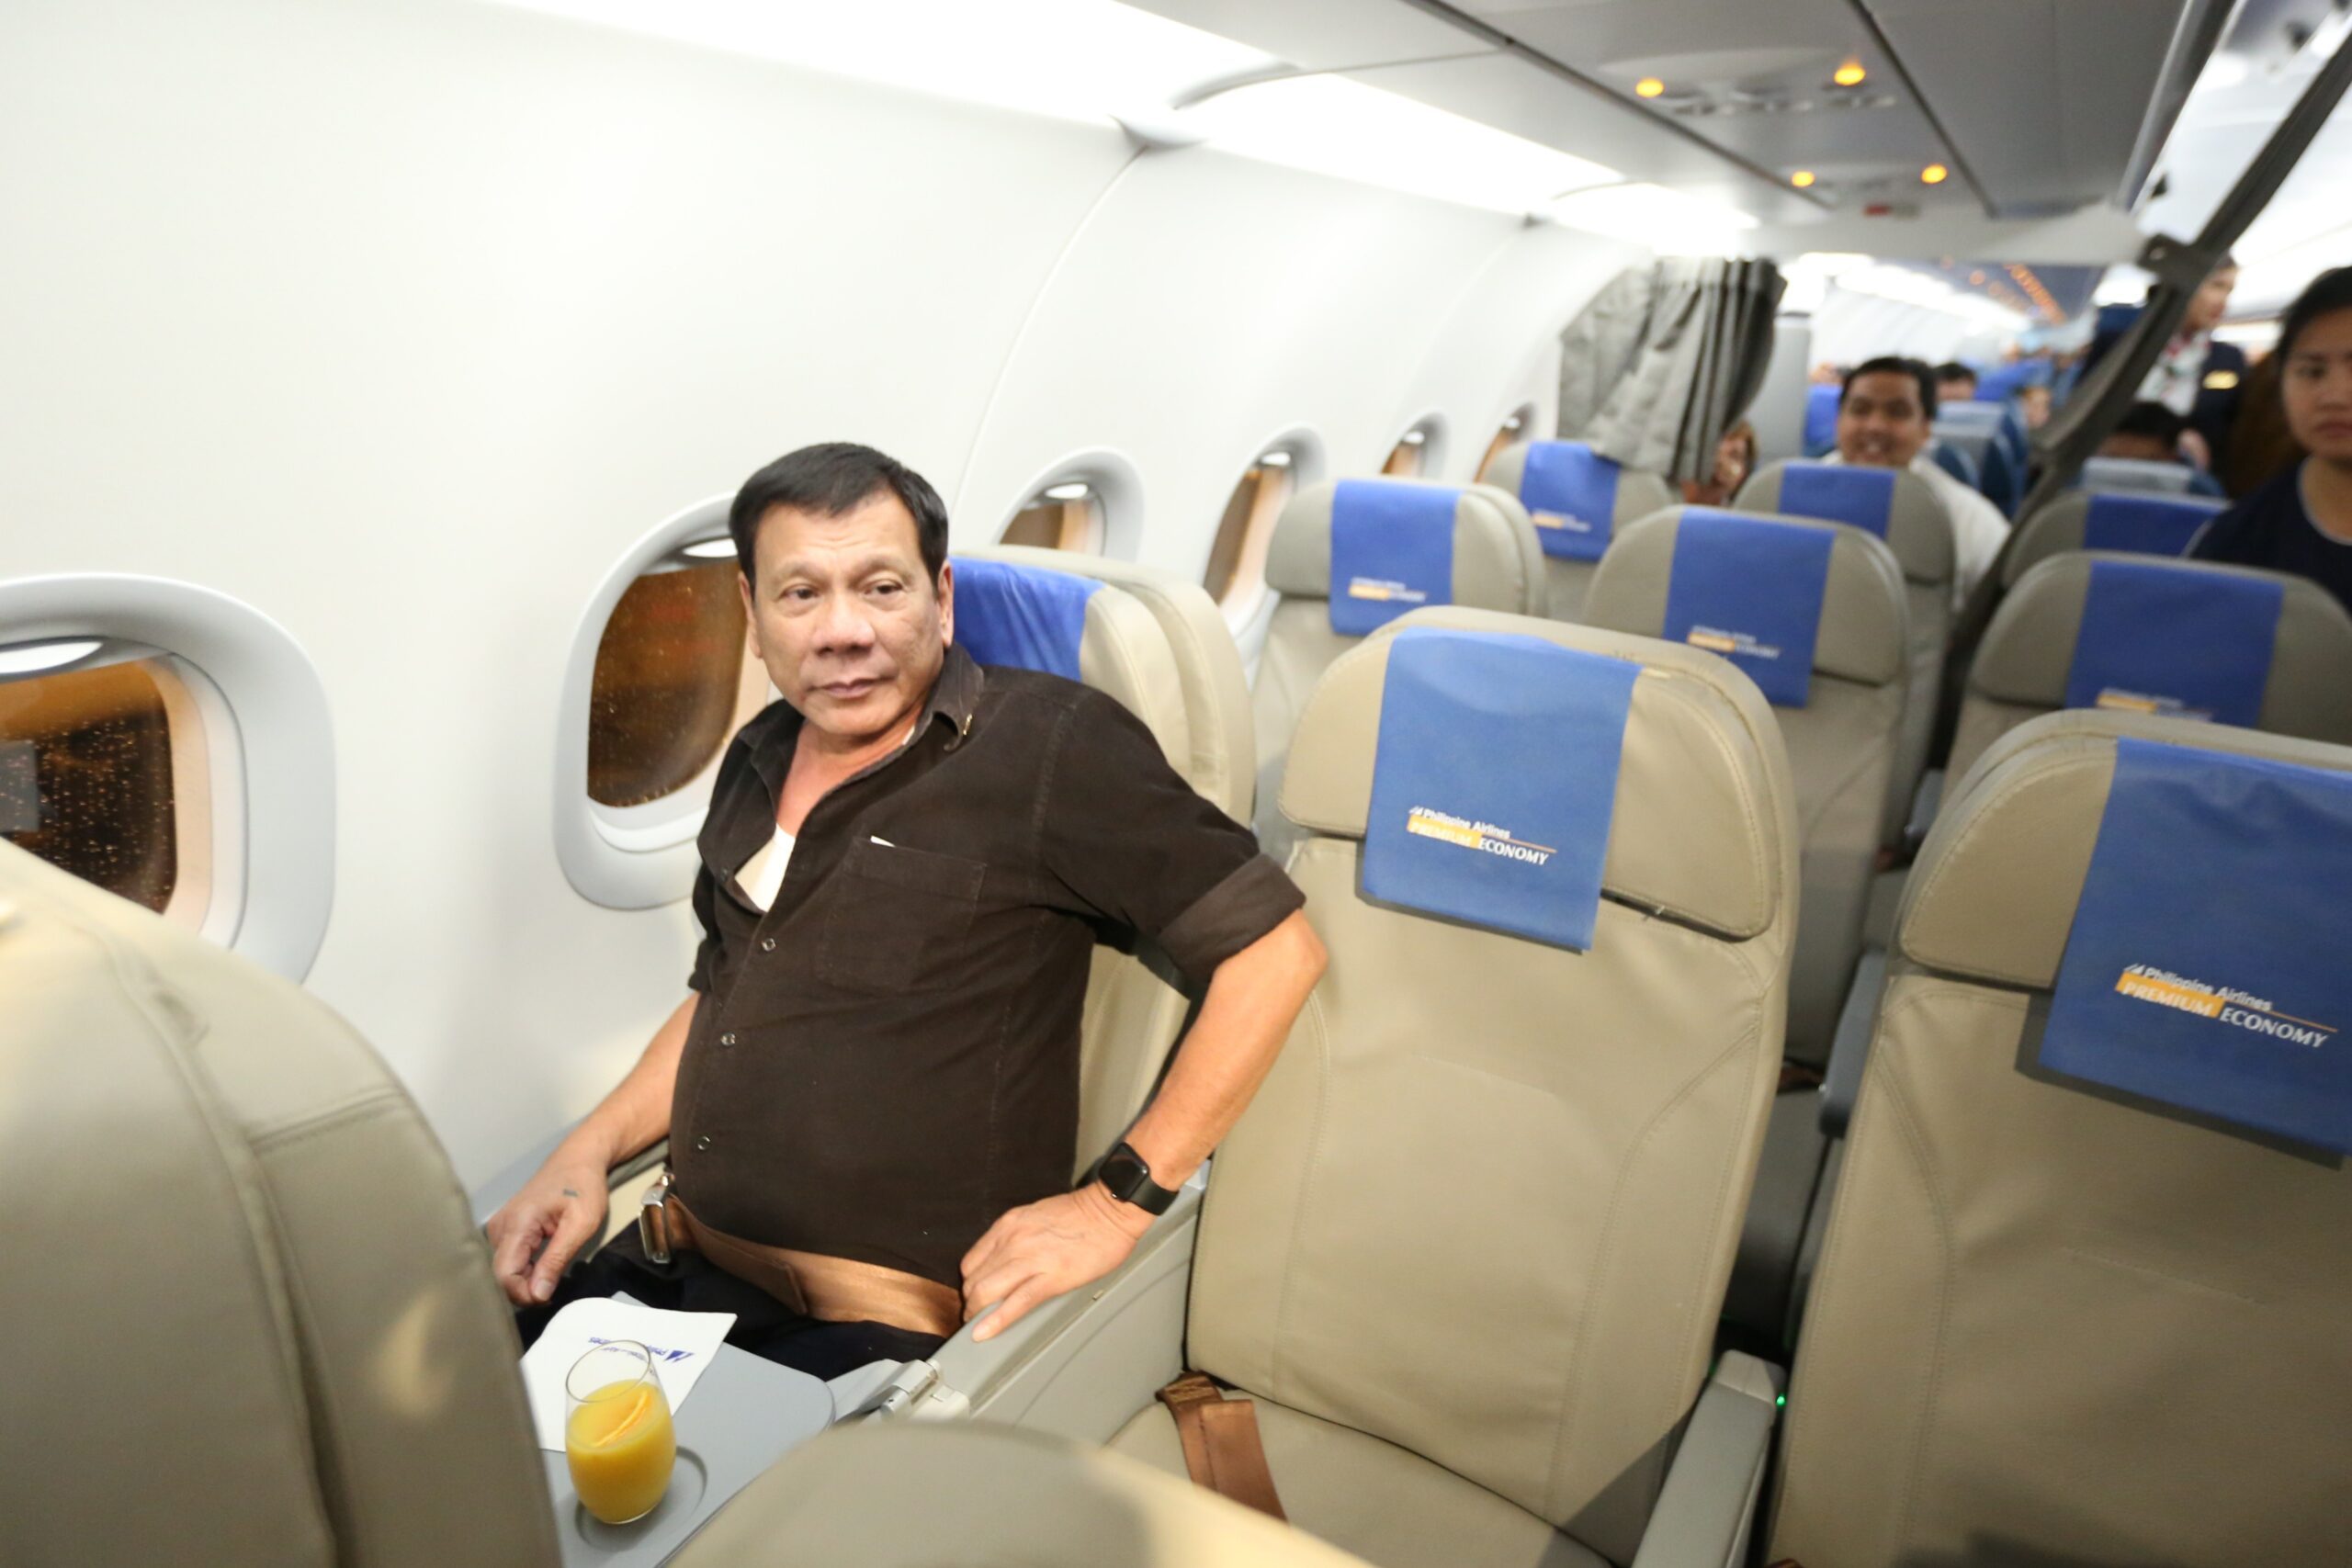 Duterte wants to turn presidential plane into ‘air ambulance’